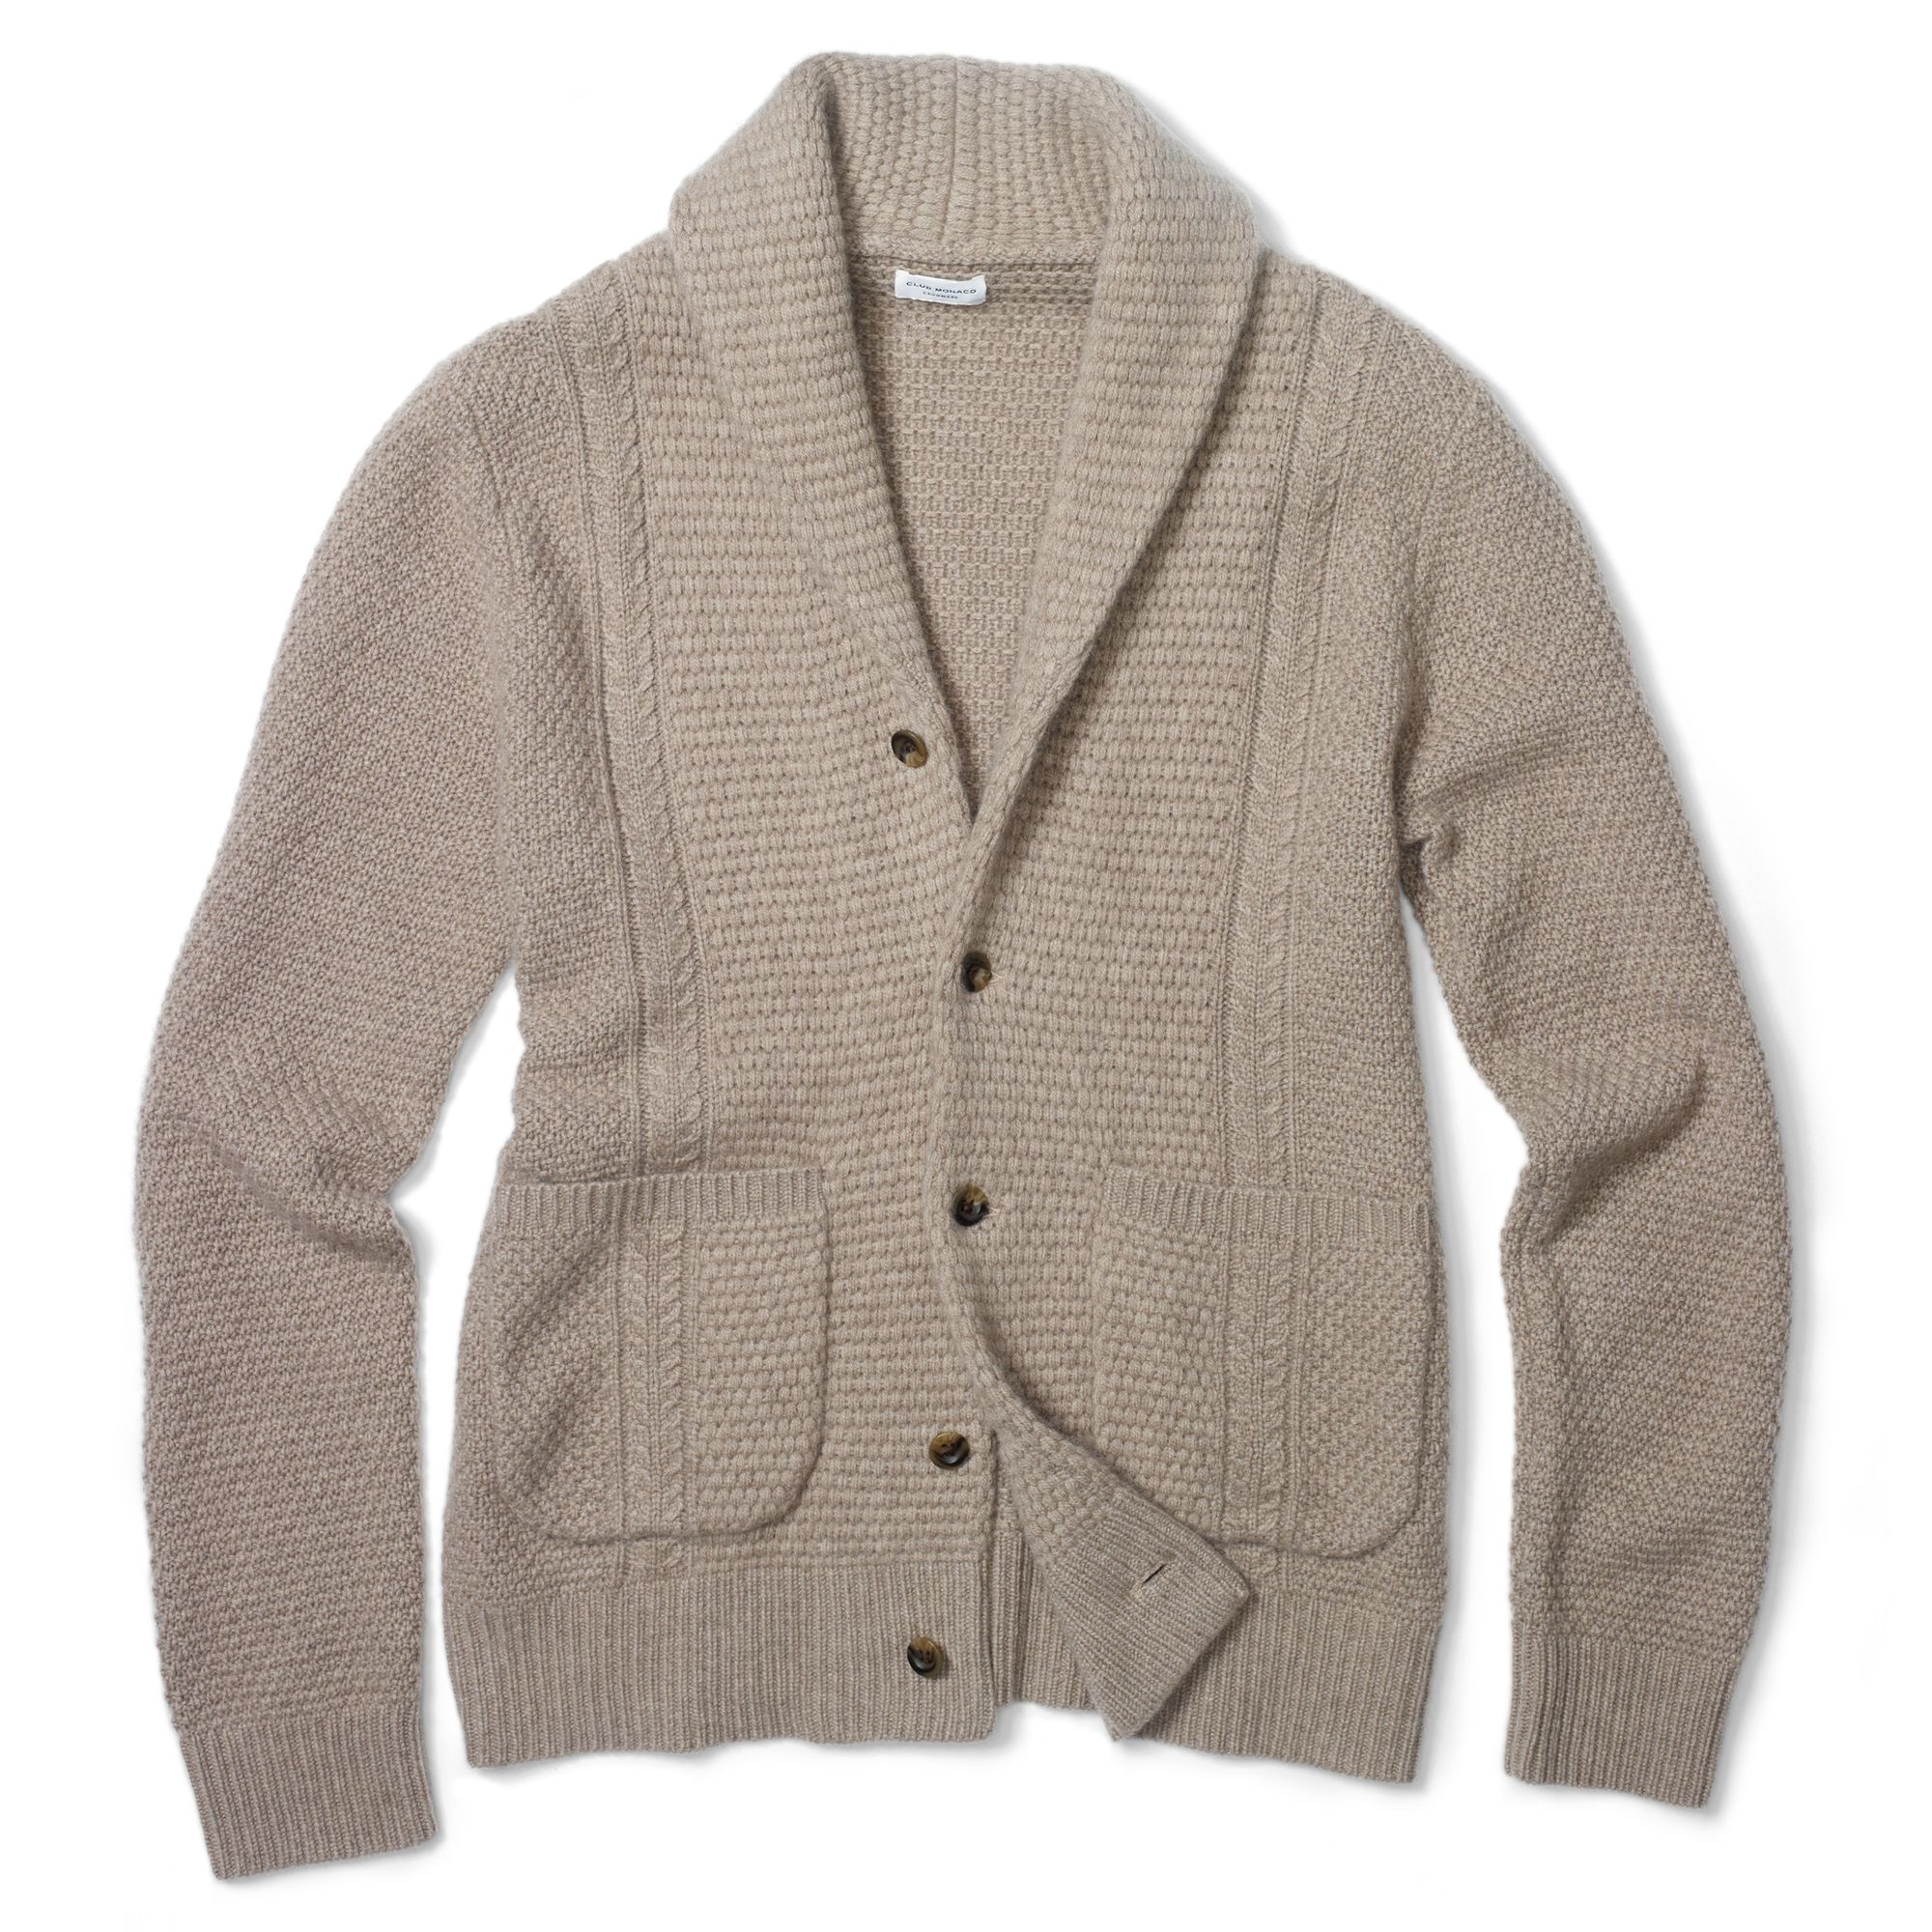 Lyst - Club Monaco Cole Cashmere Shawl Cardigan in Natural for Men